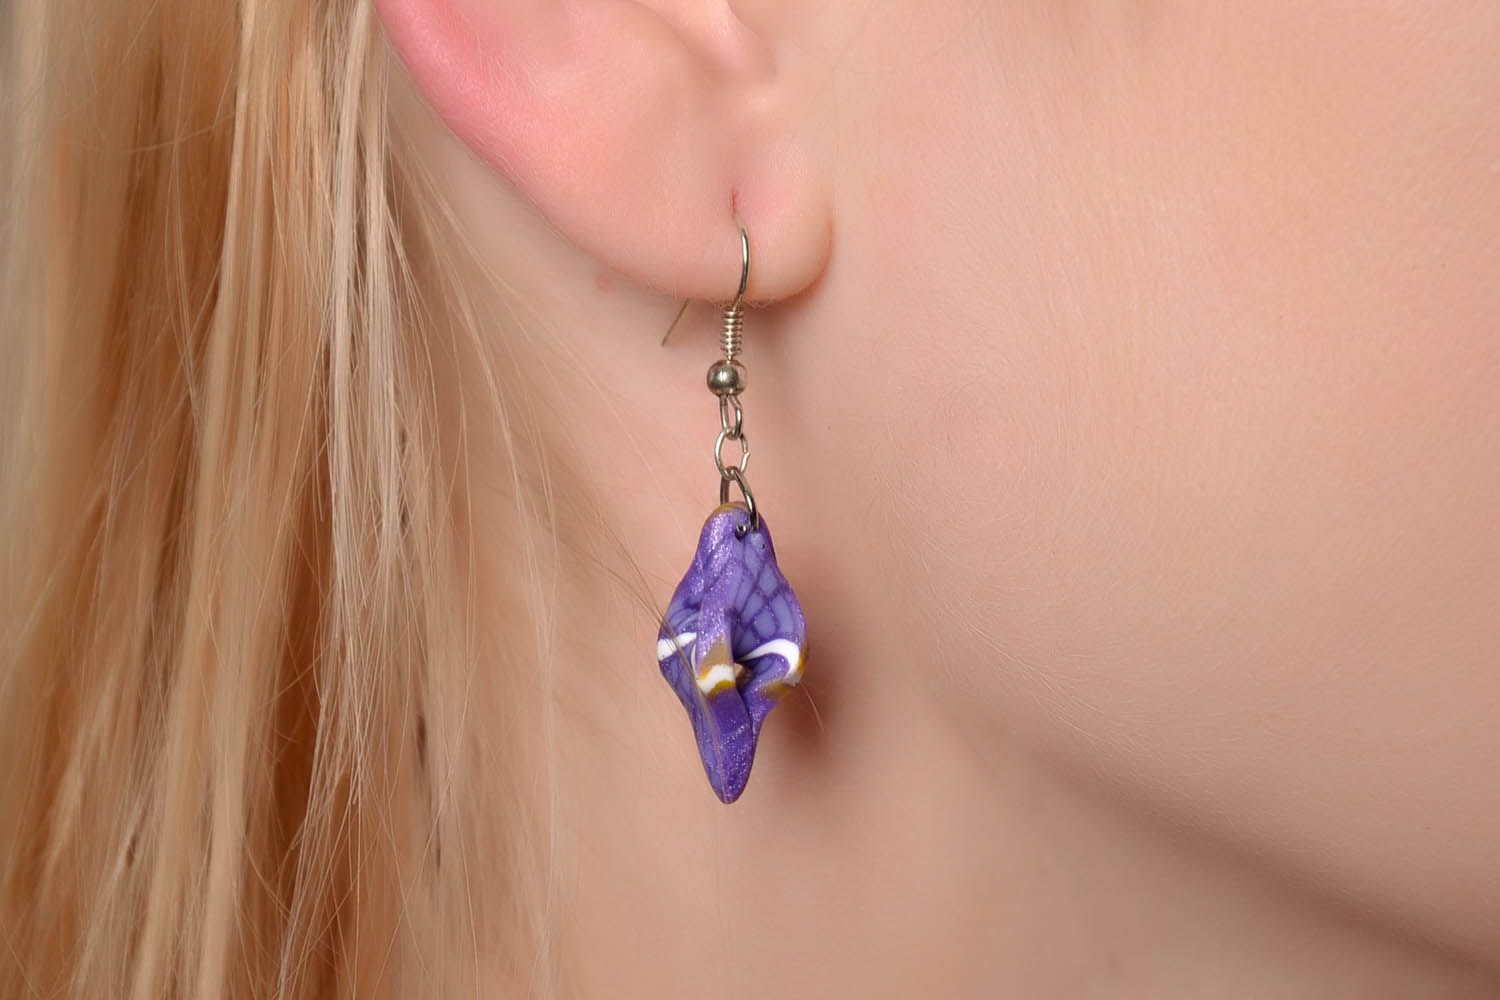 Violet earrings made of polymer clay photo 4